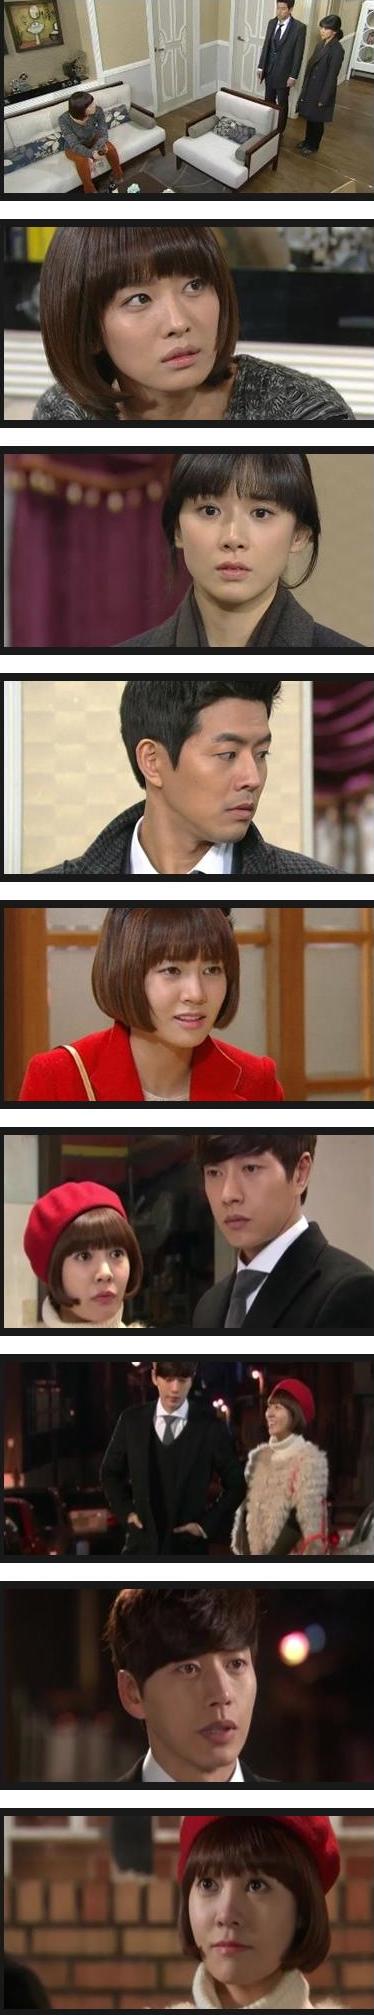 episodes 29 and 30 captures for the Korean drama 'My Daughter Seo-yeong'